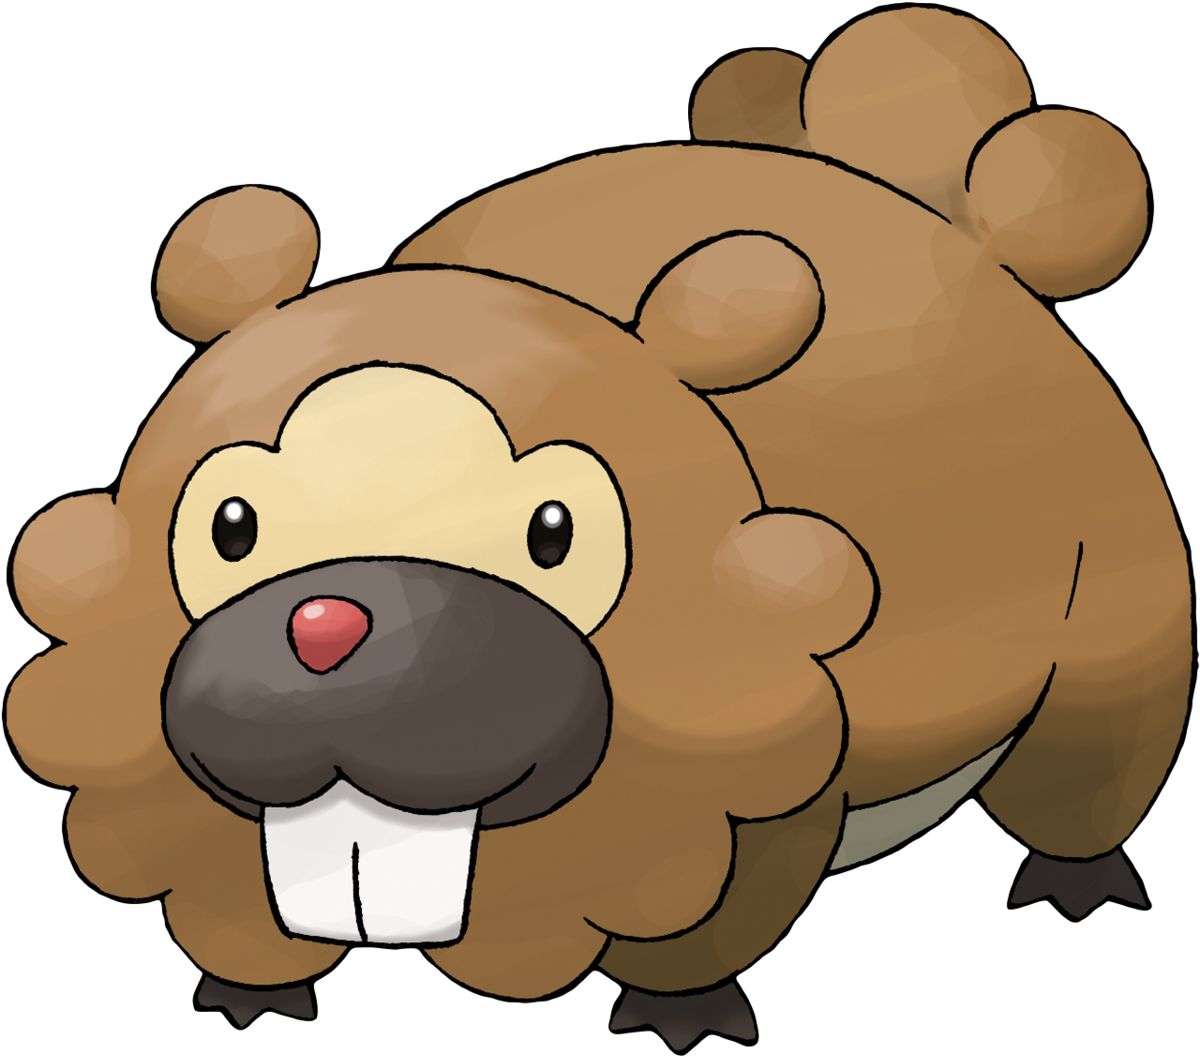 Bidoof Pokemon Clipart - Large Size Png Image - PikPng.